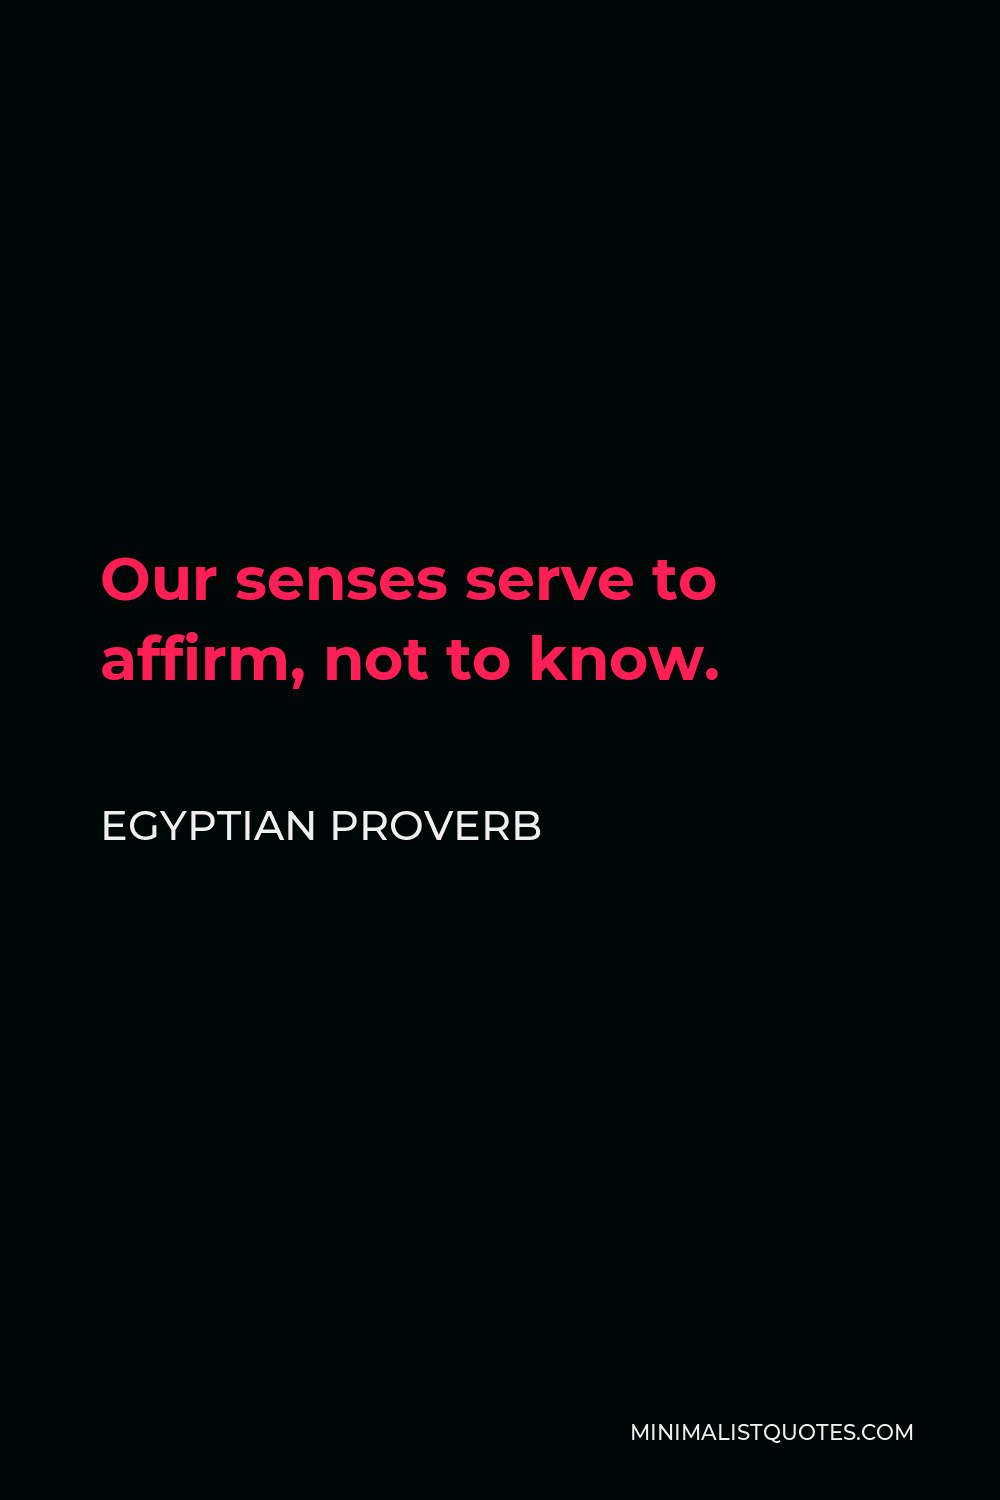 Egyptian Proverb Quote - Our senses serve to affirm, not to know.